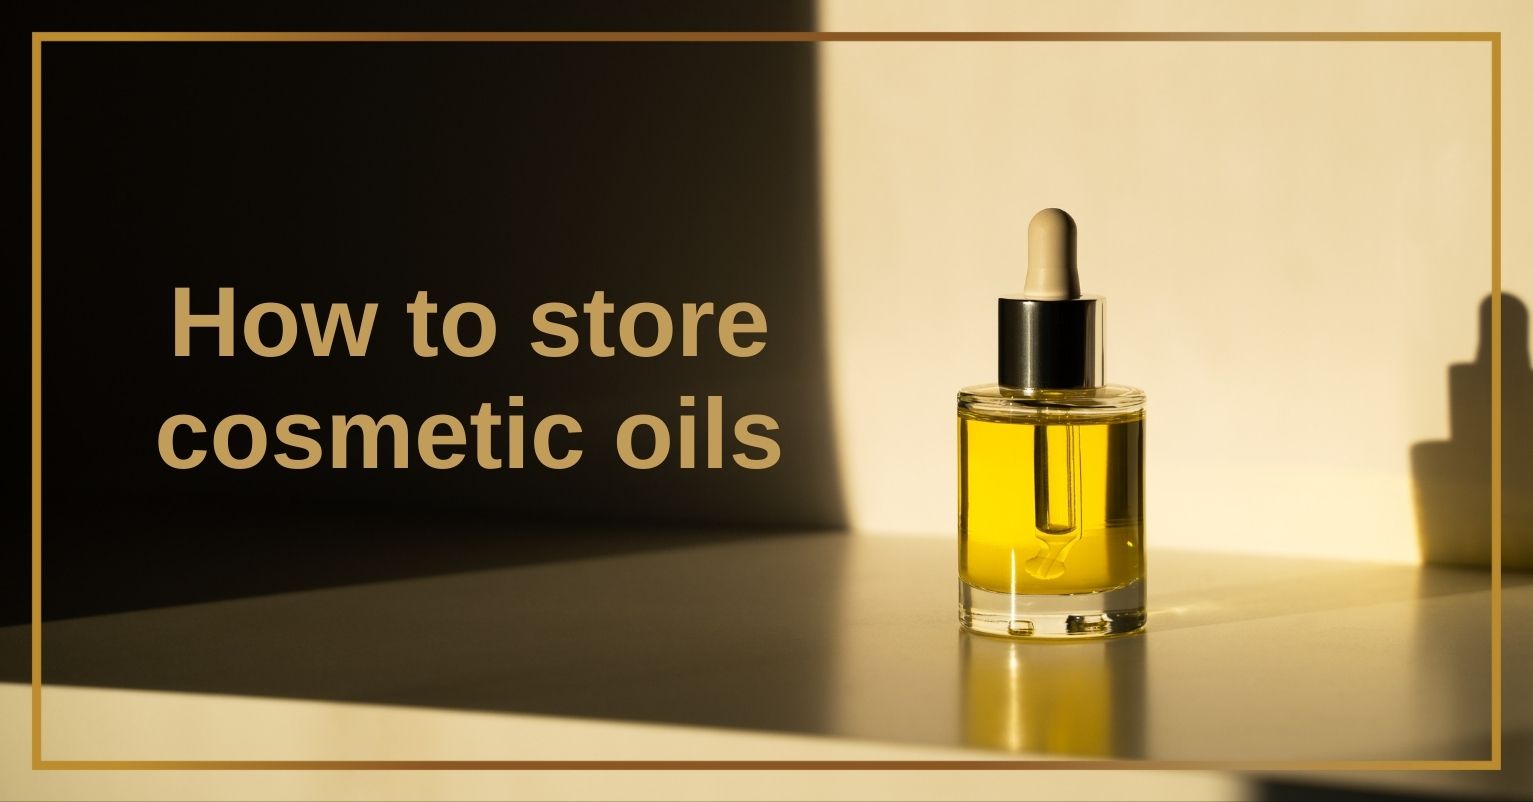 How To Store Cosmetic Oils